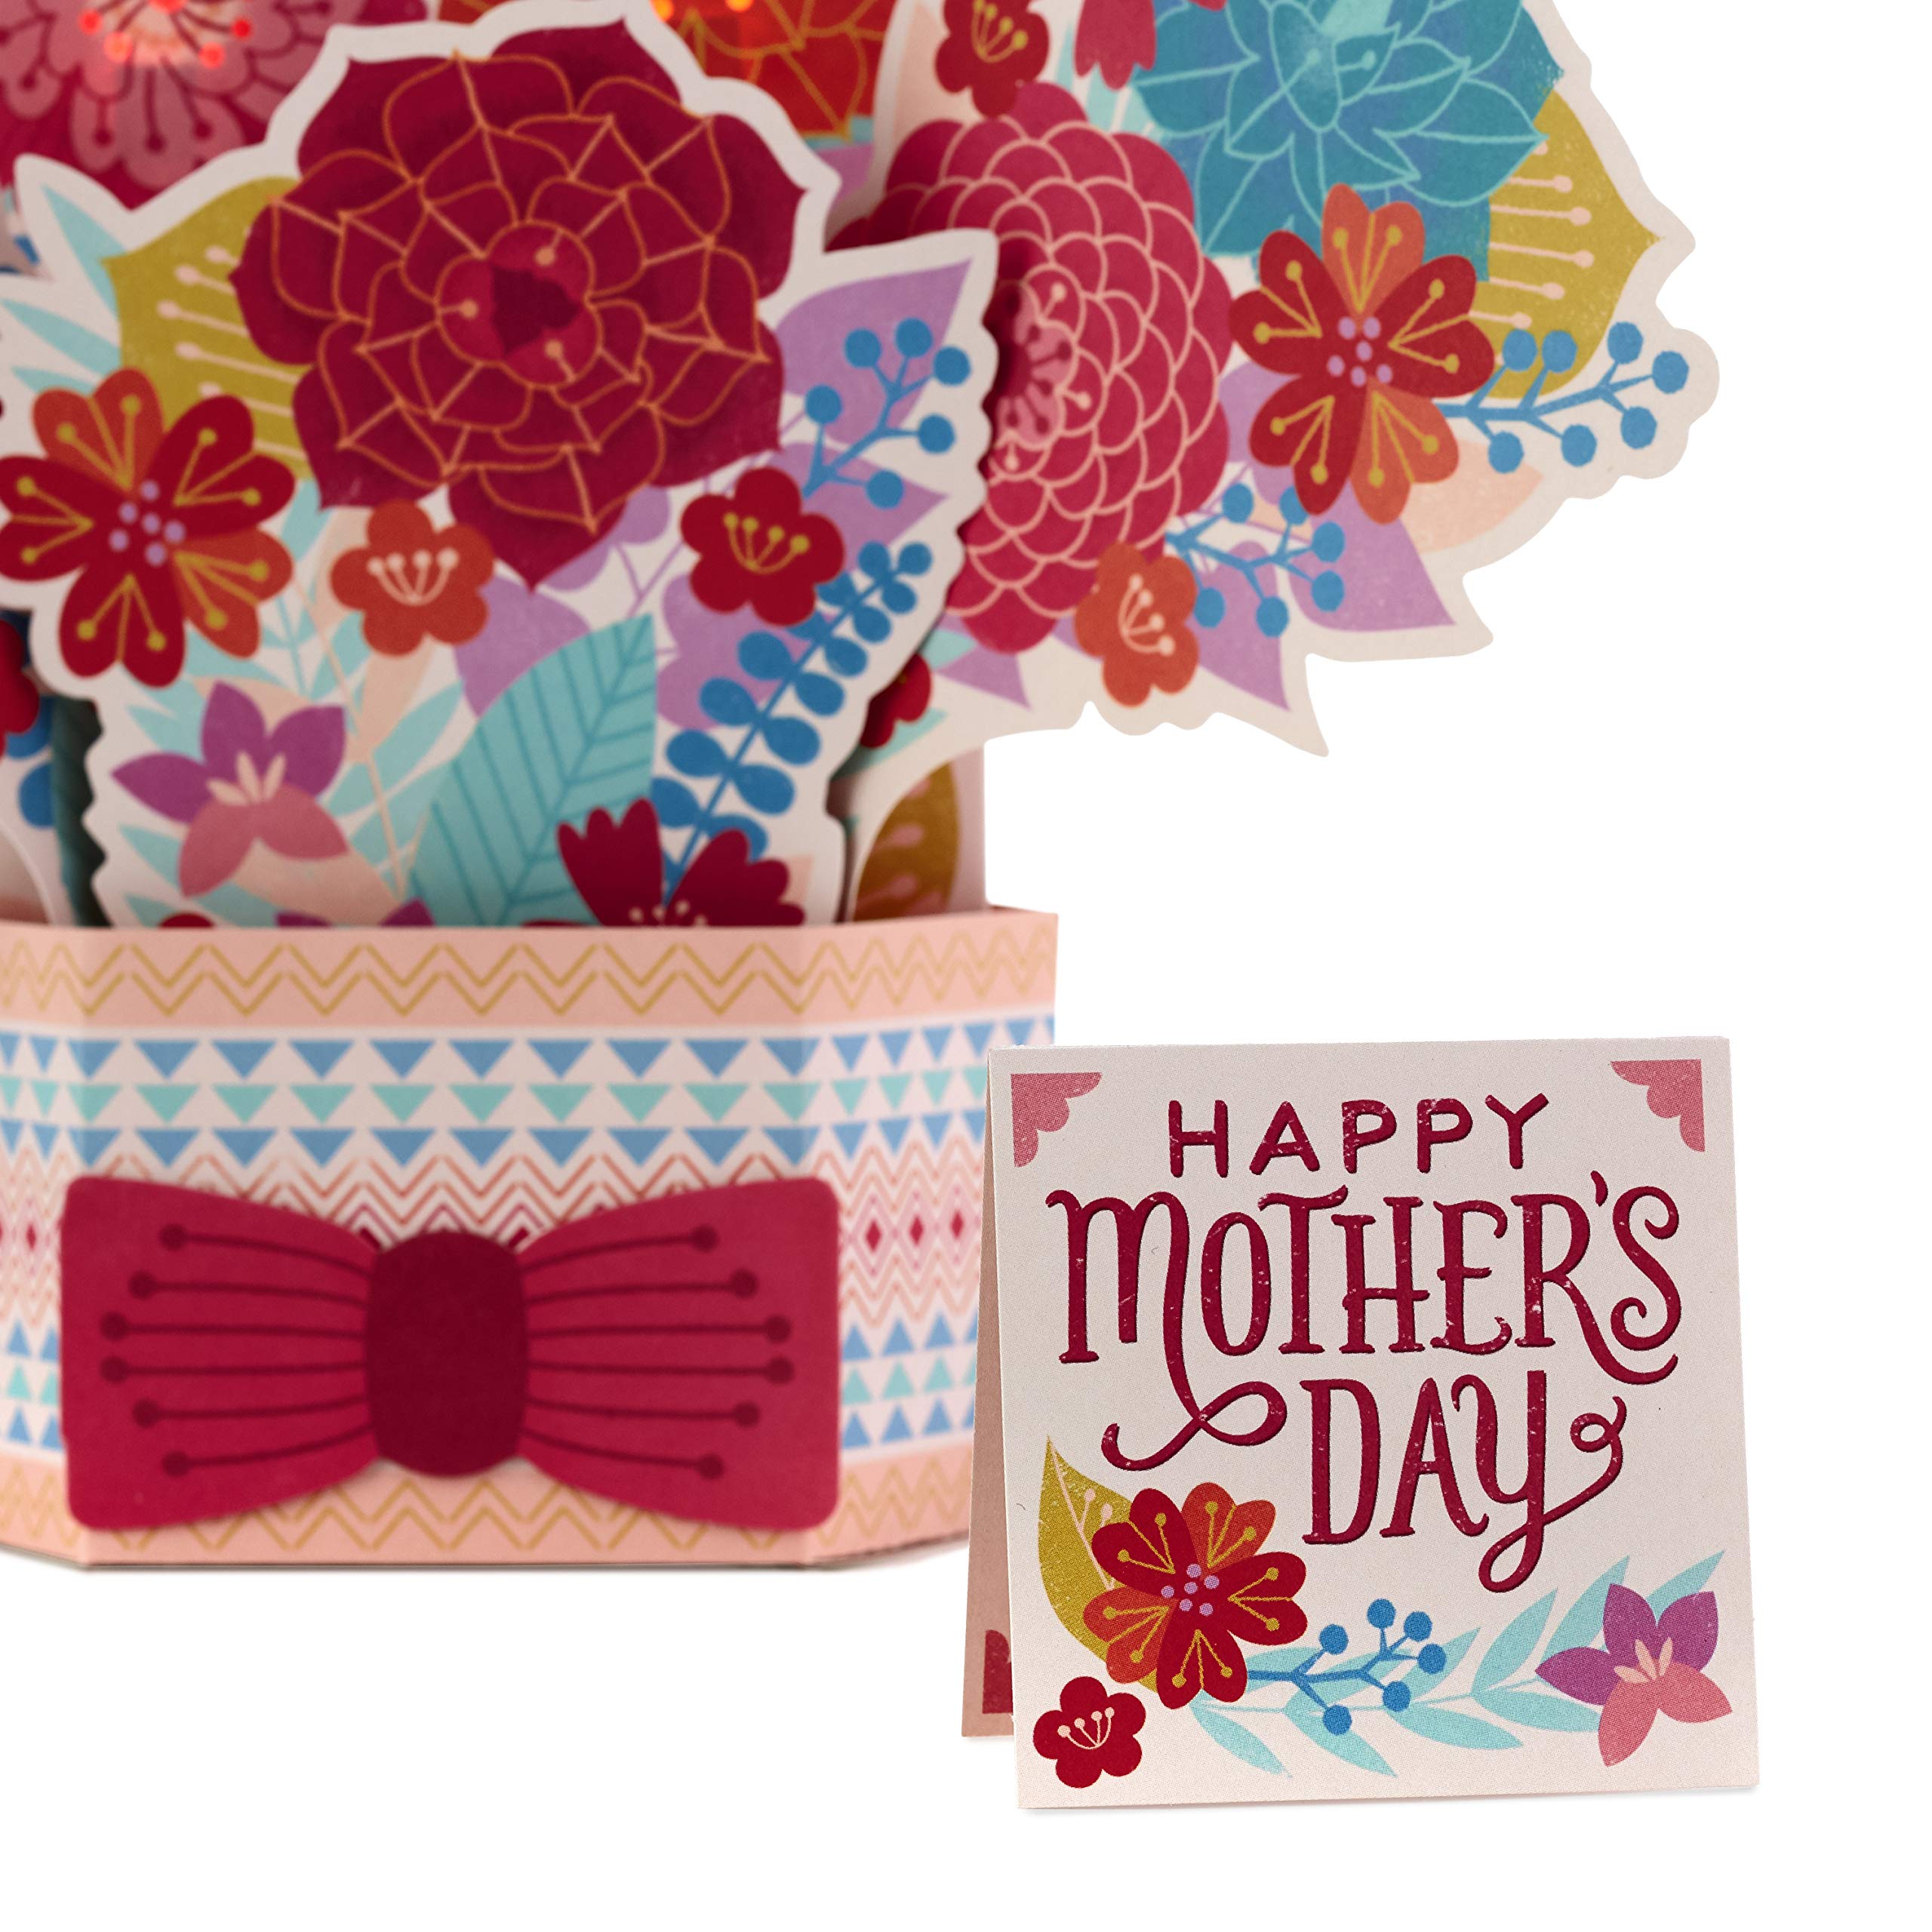 Hallmark Pop Up Mother's Day Card with Light and Sound for Mom (Displayable Pot of Flowers, Plays Happy by Pharrell Williams)